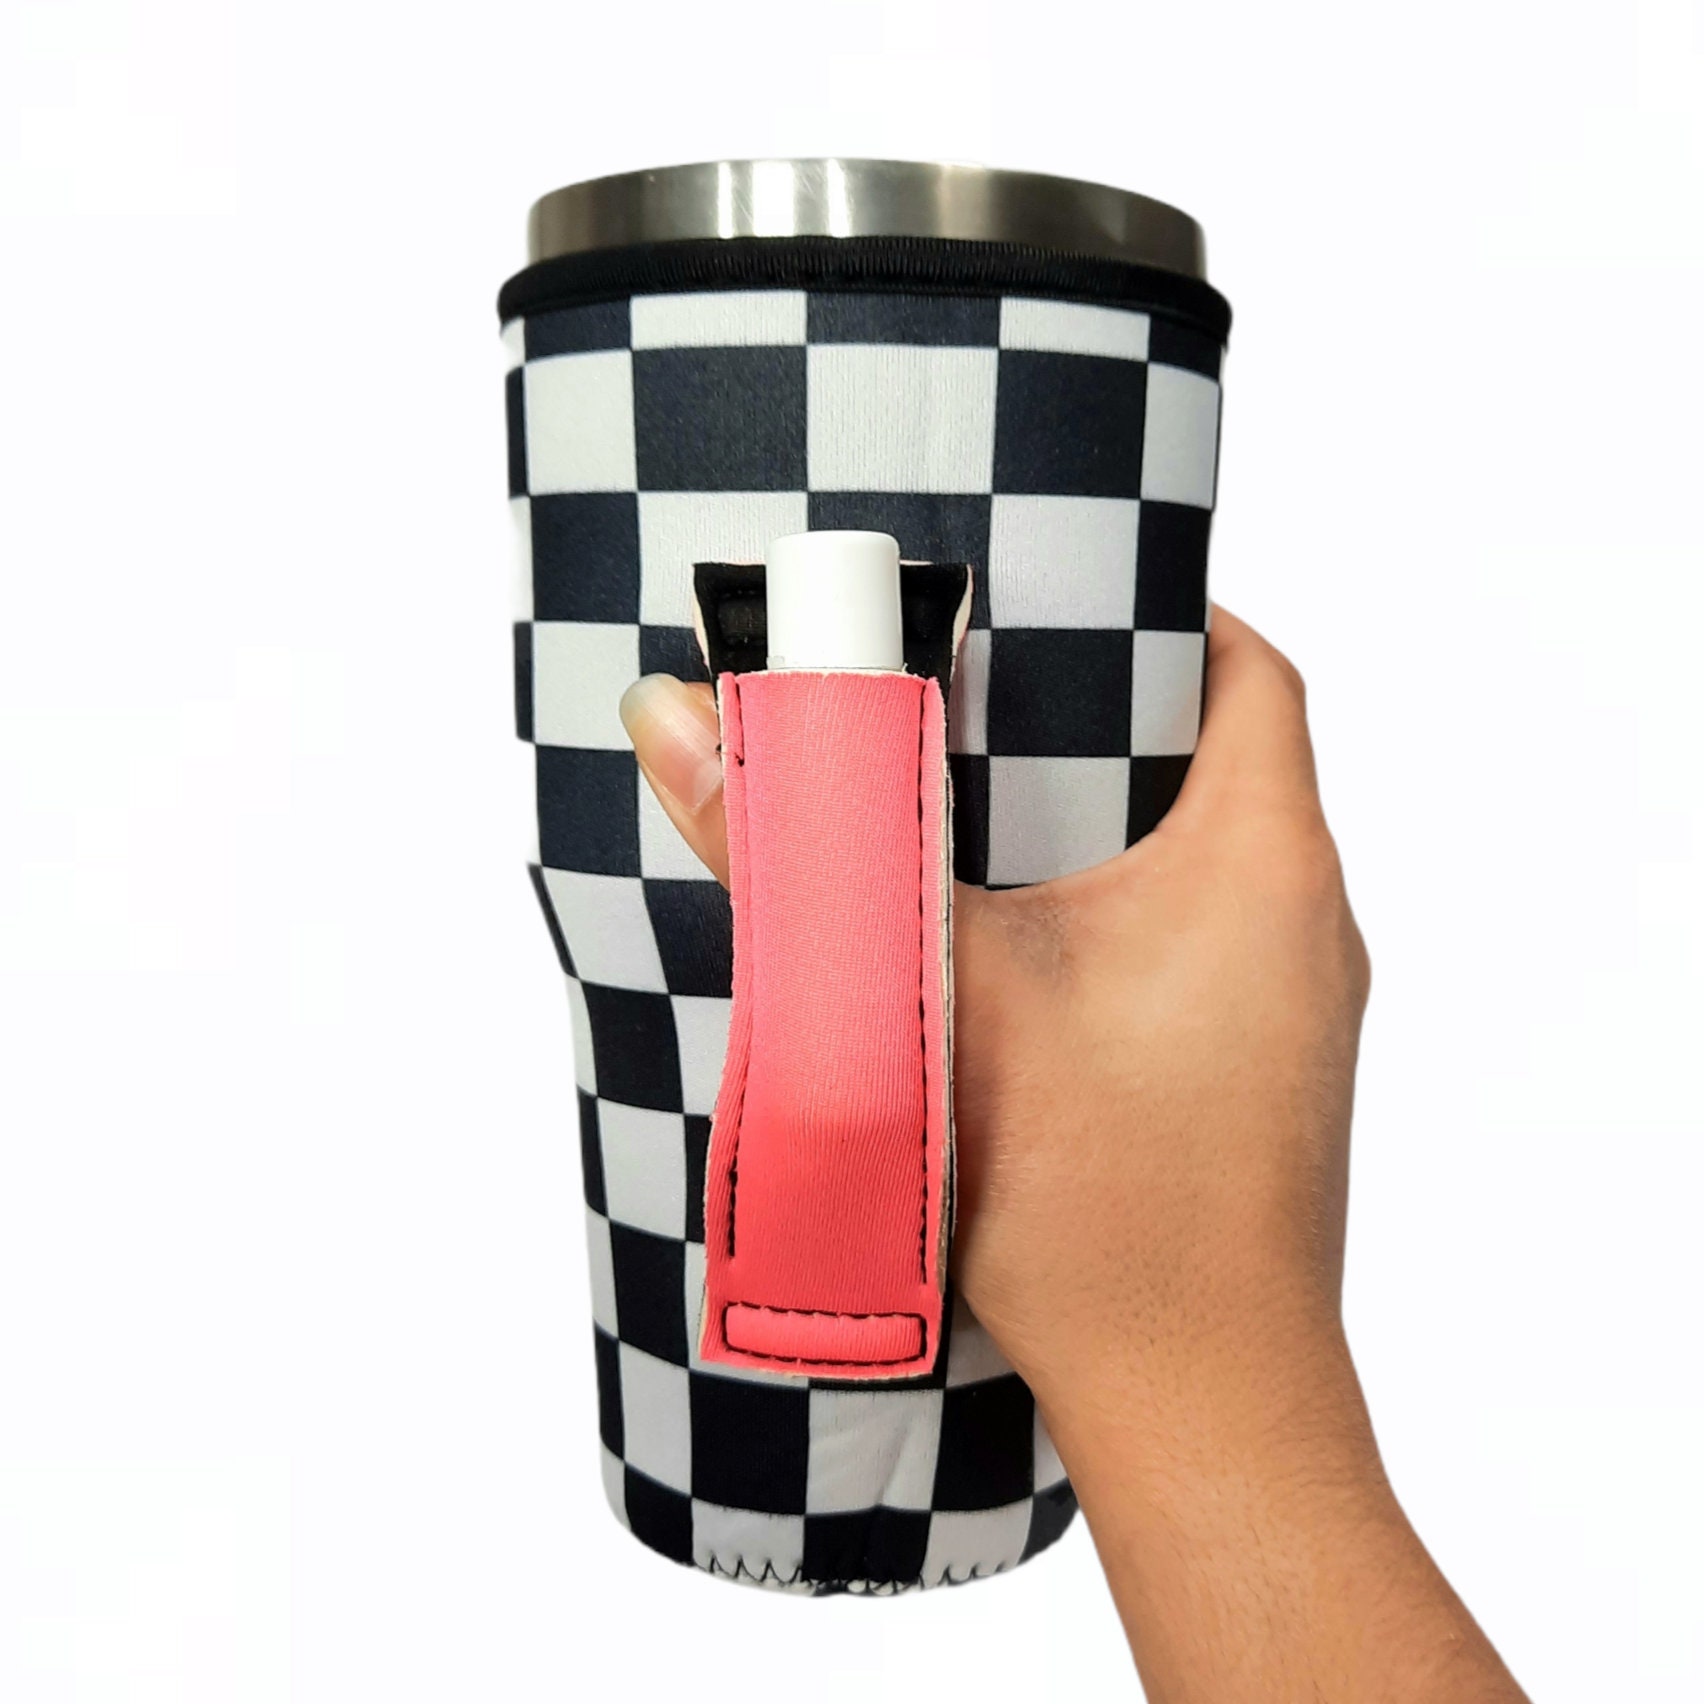 Checkerboard with Neon Pink Water Bottle Handler With Pocket Insulator Fits  bottles tallboys pocket handle w/chapstick holder patent pending